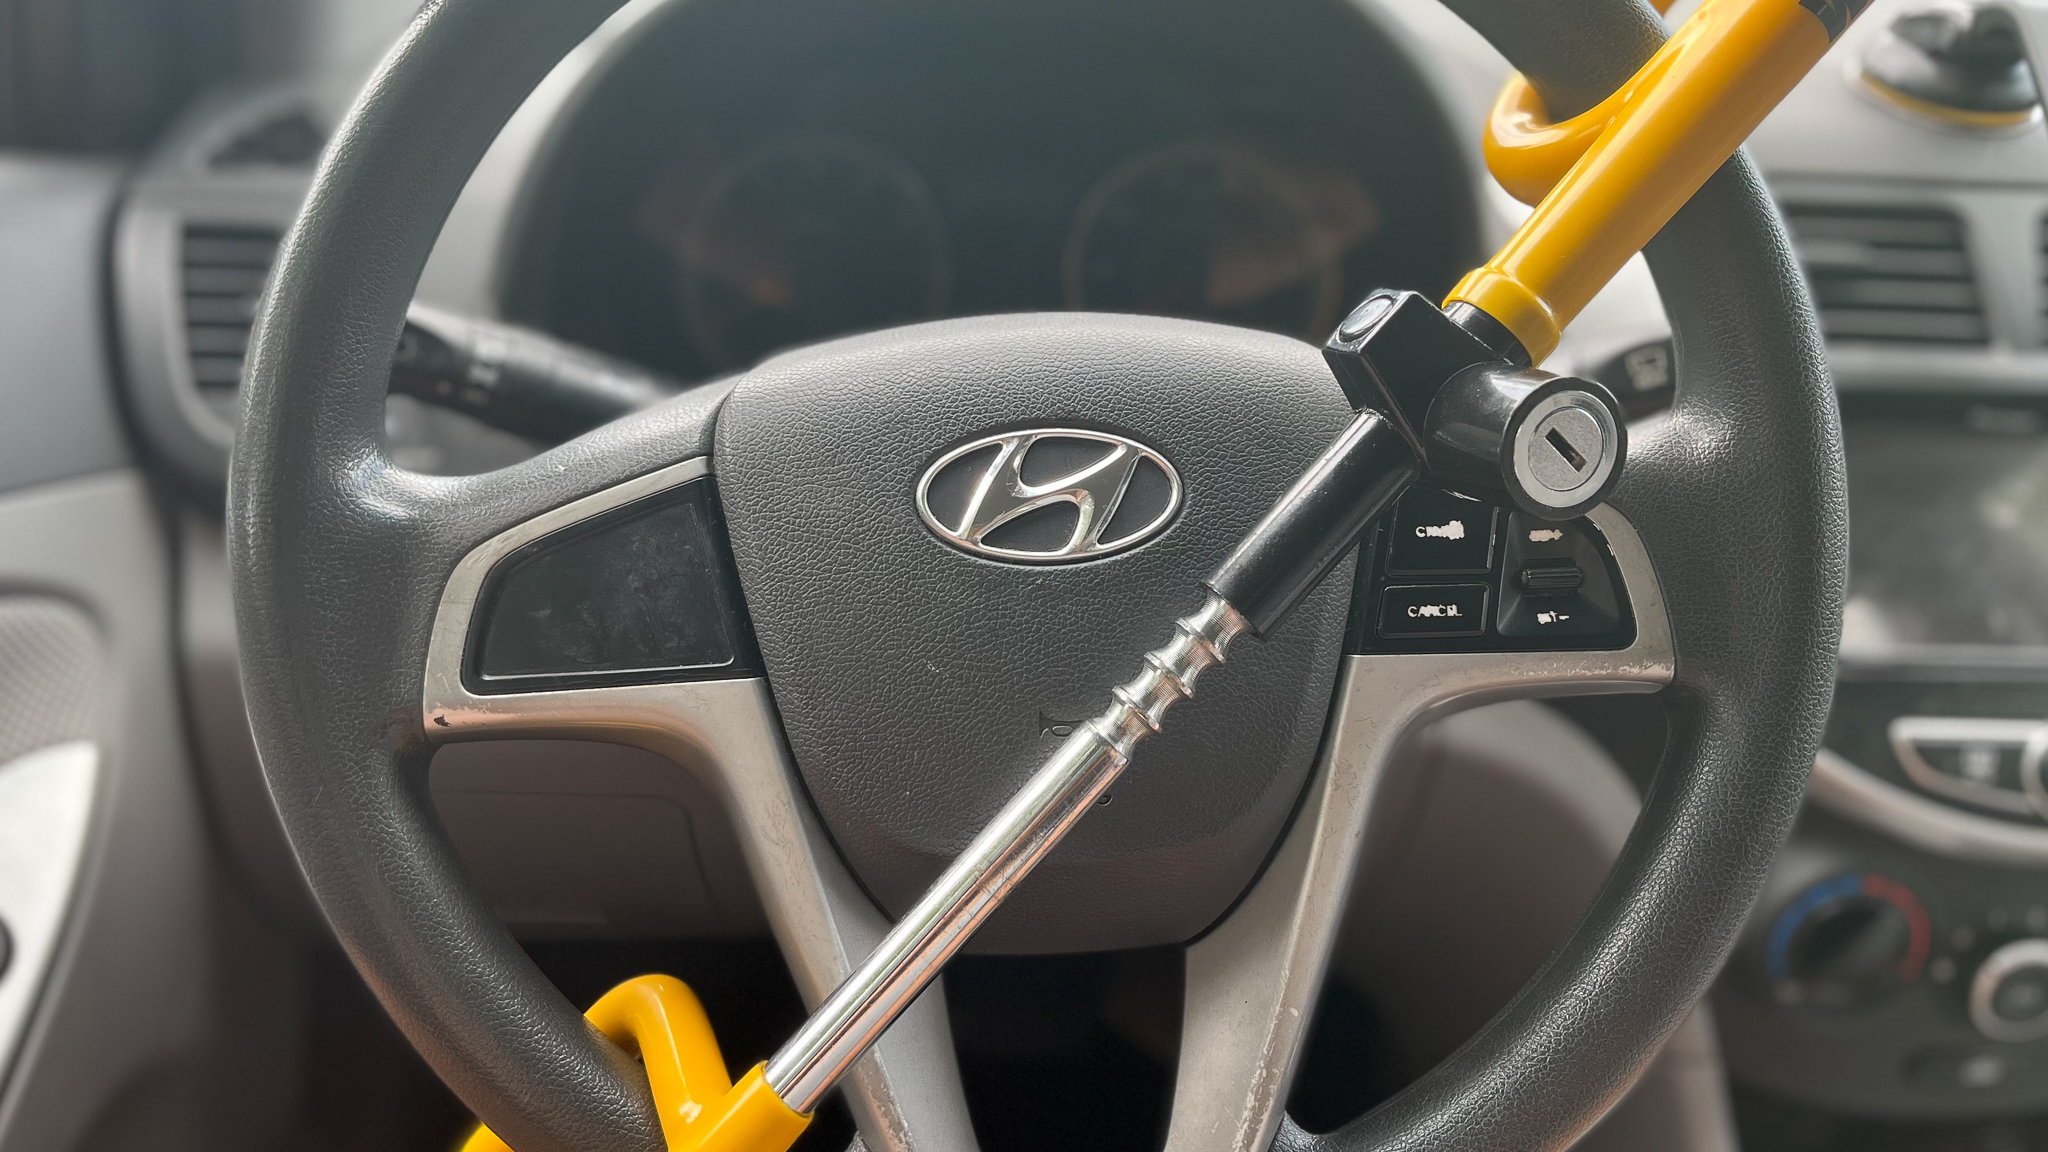 How to lock and unlock your car's steering wheel